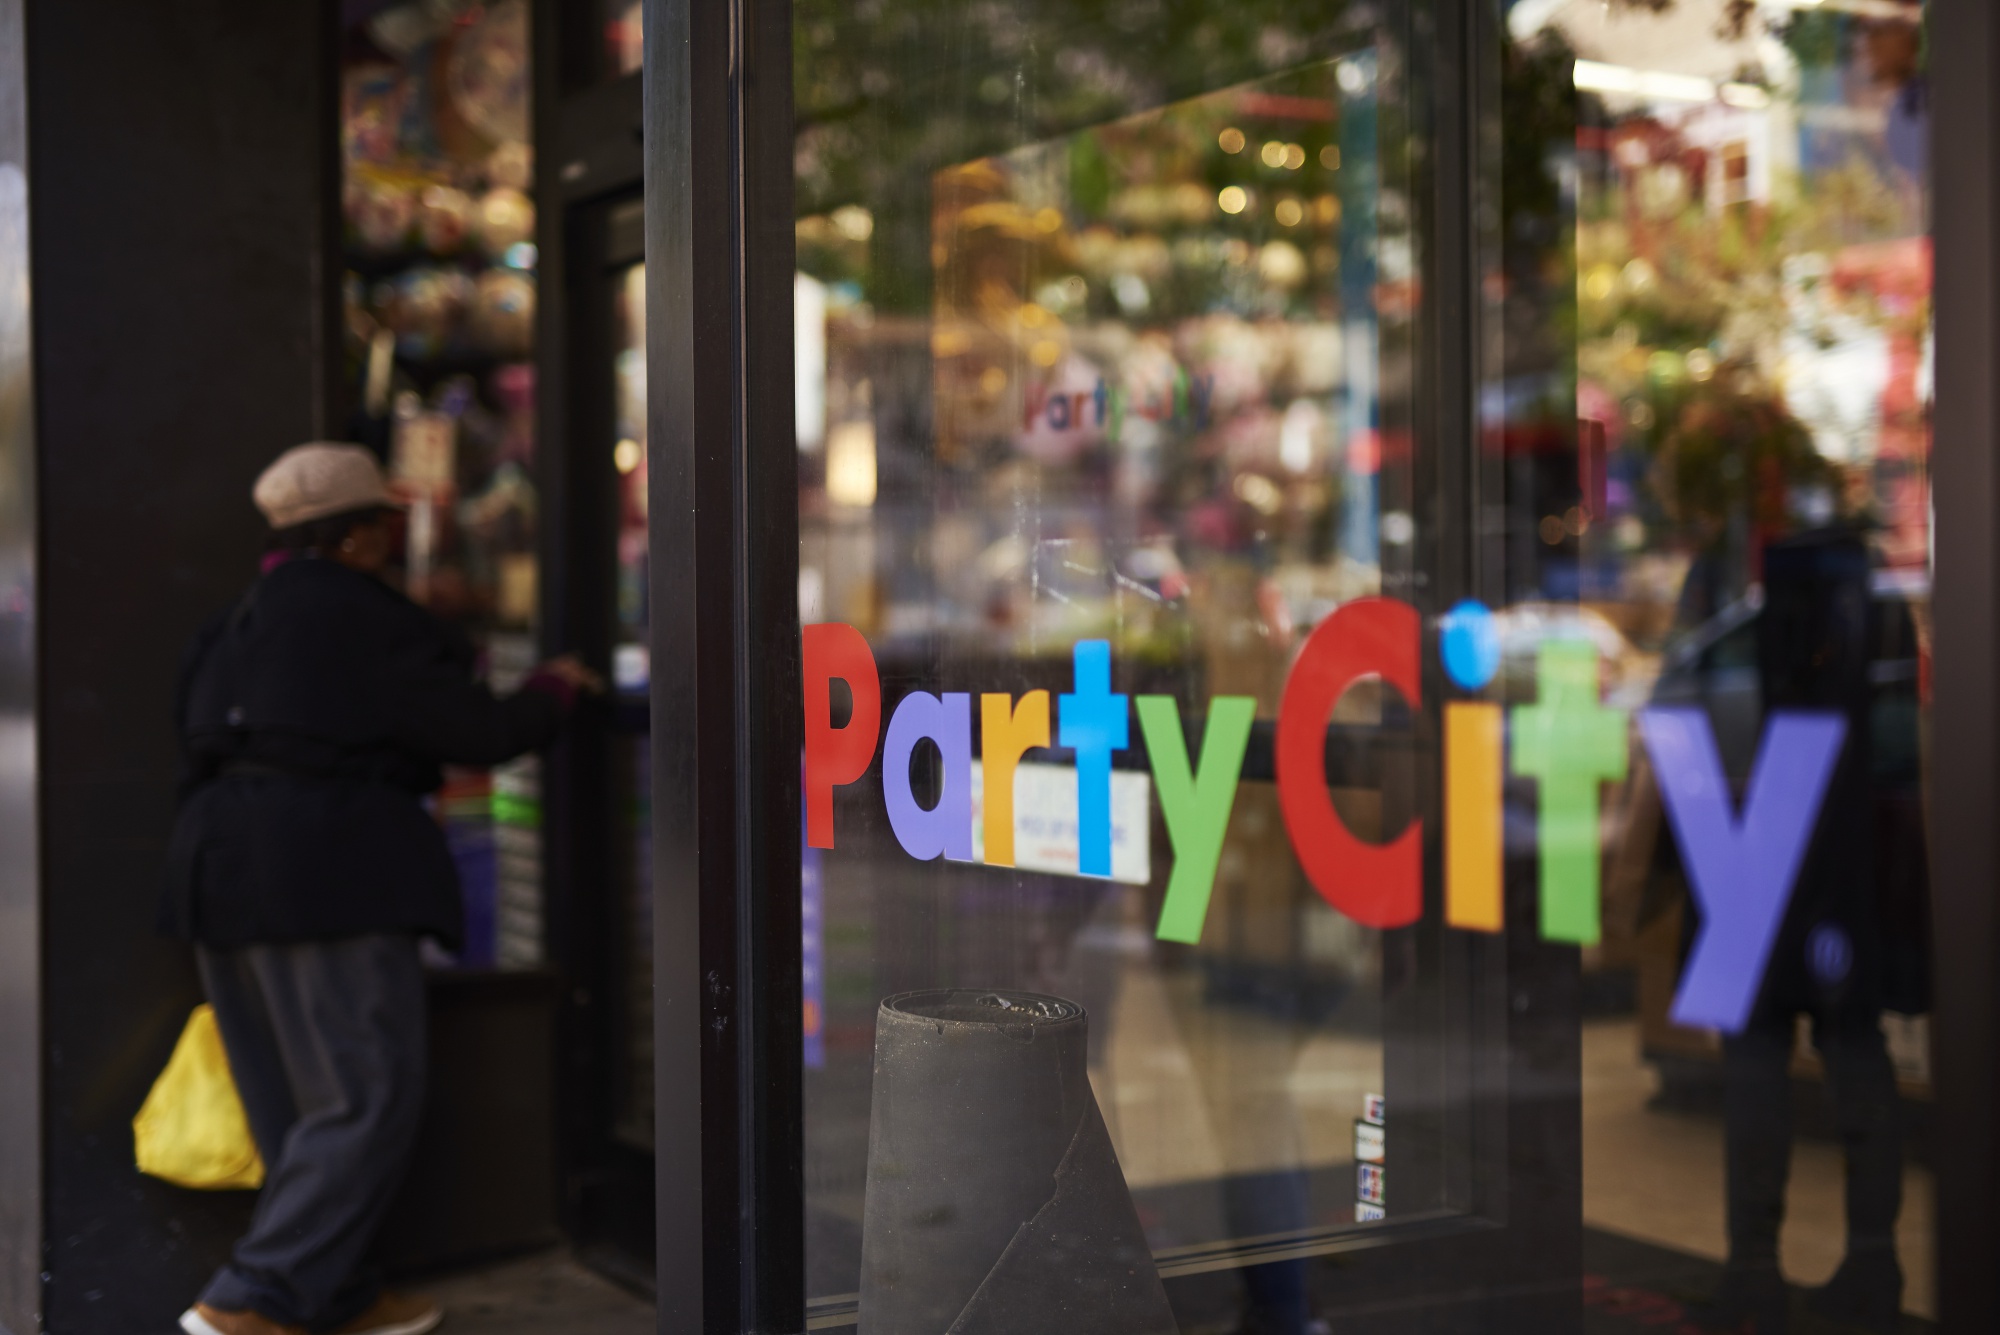 Distressed Retailer Party City May Cut Debt With Bond Deal - Bloomberg